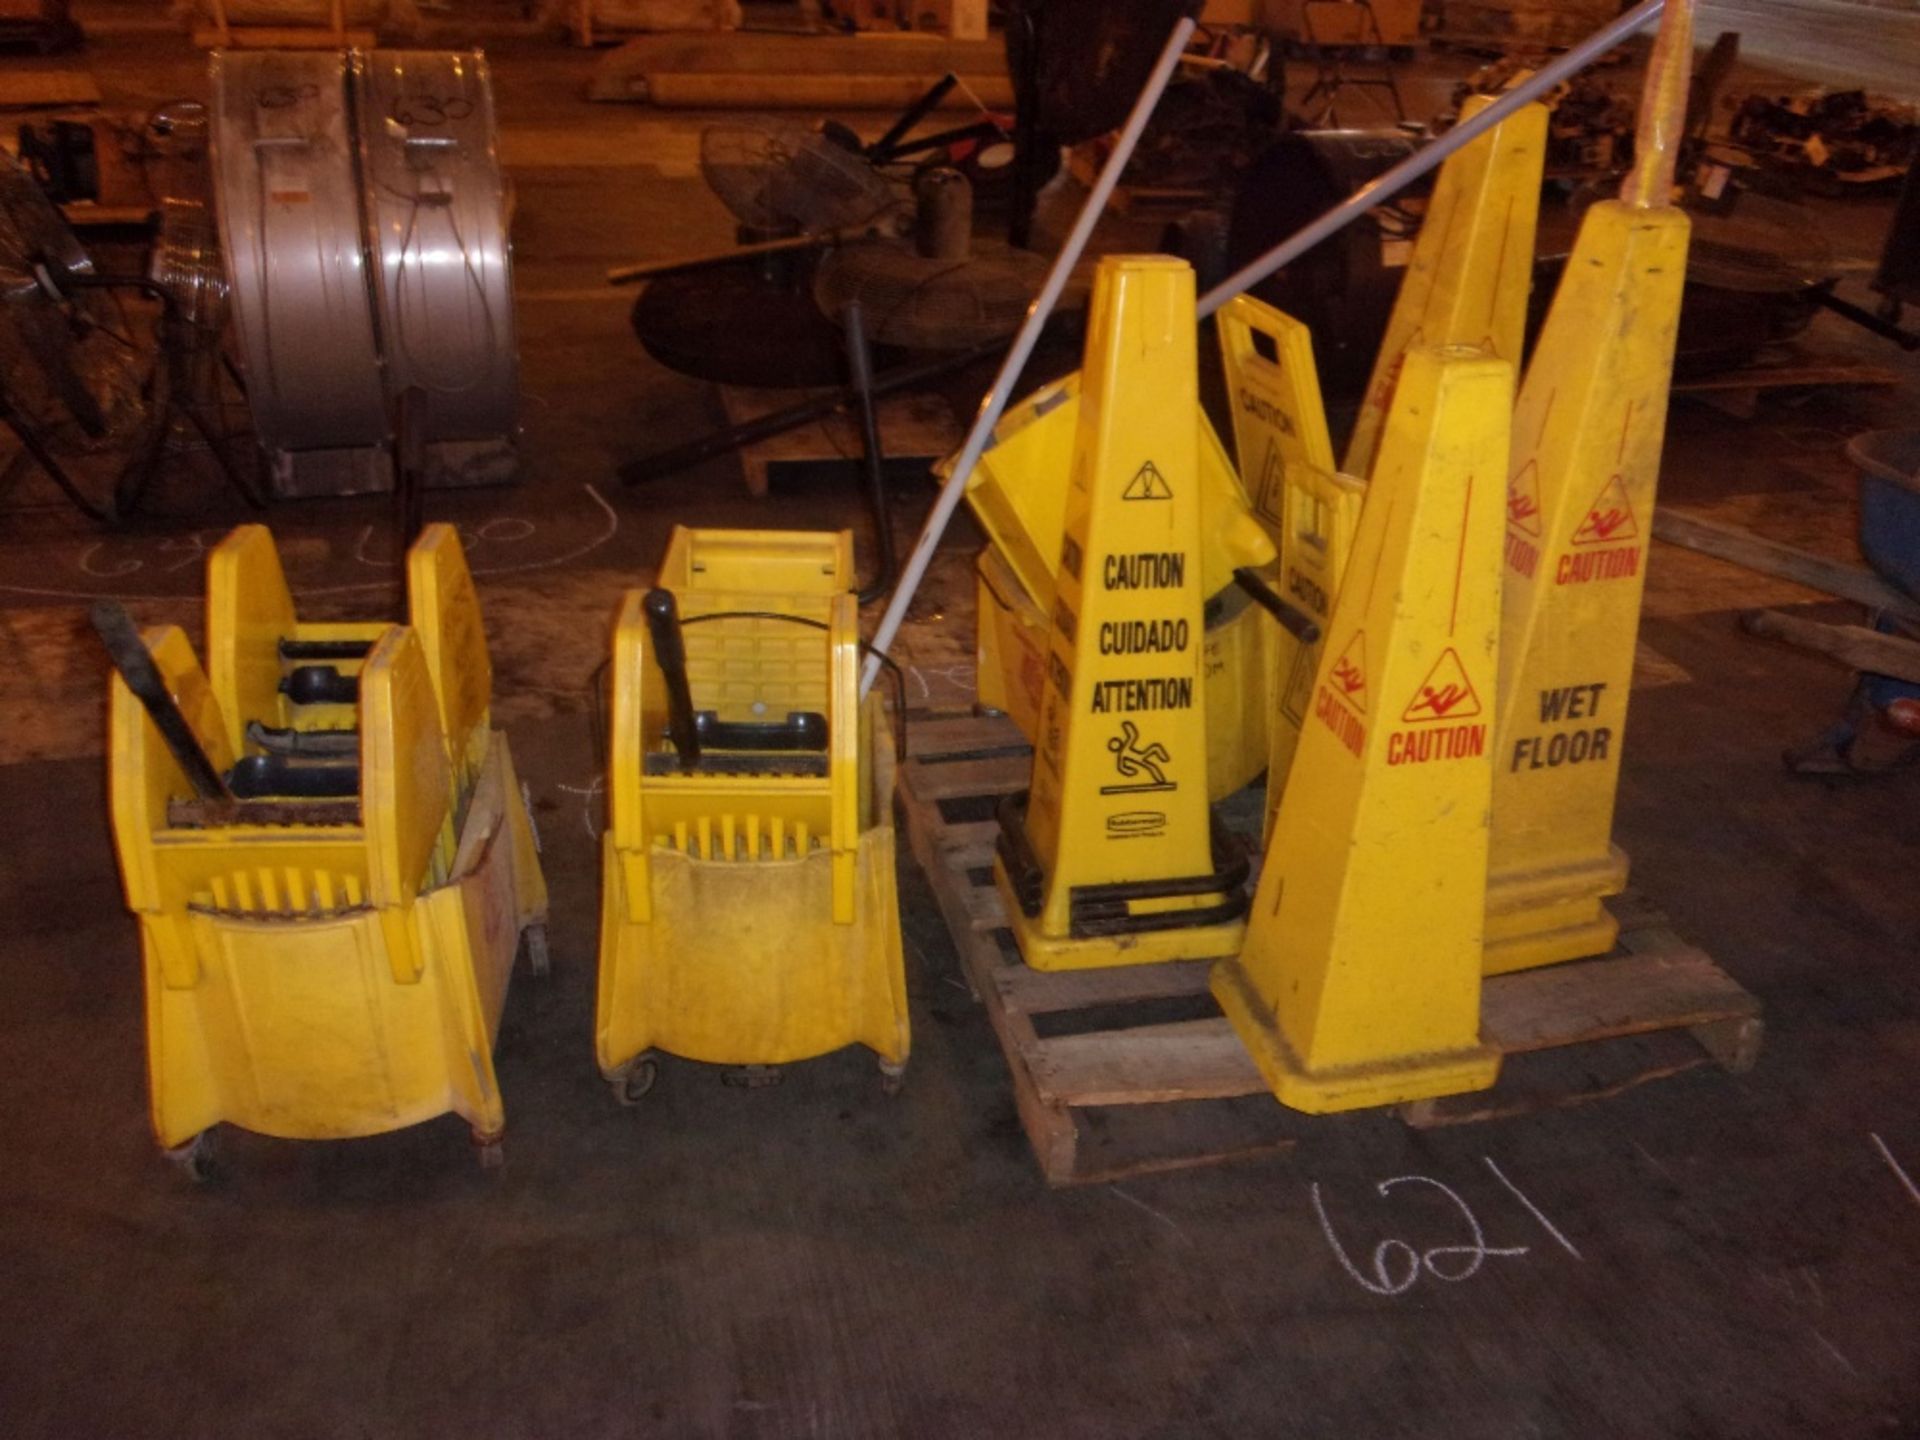 LOT OF MOP BUCKETS & SAFETY SIGNS - Image 2 of 2